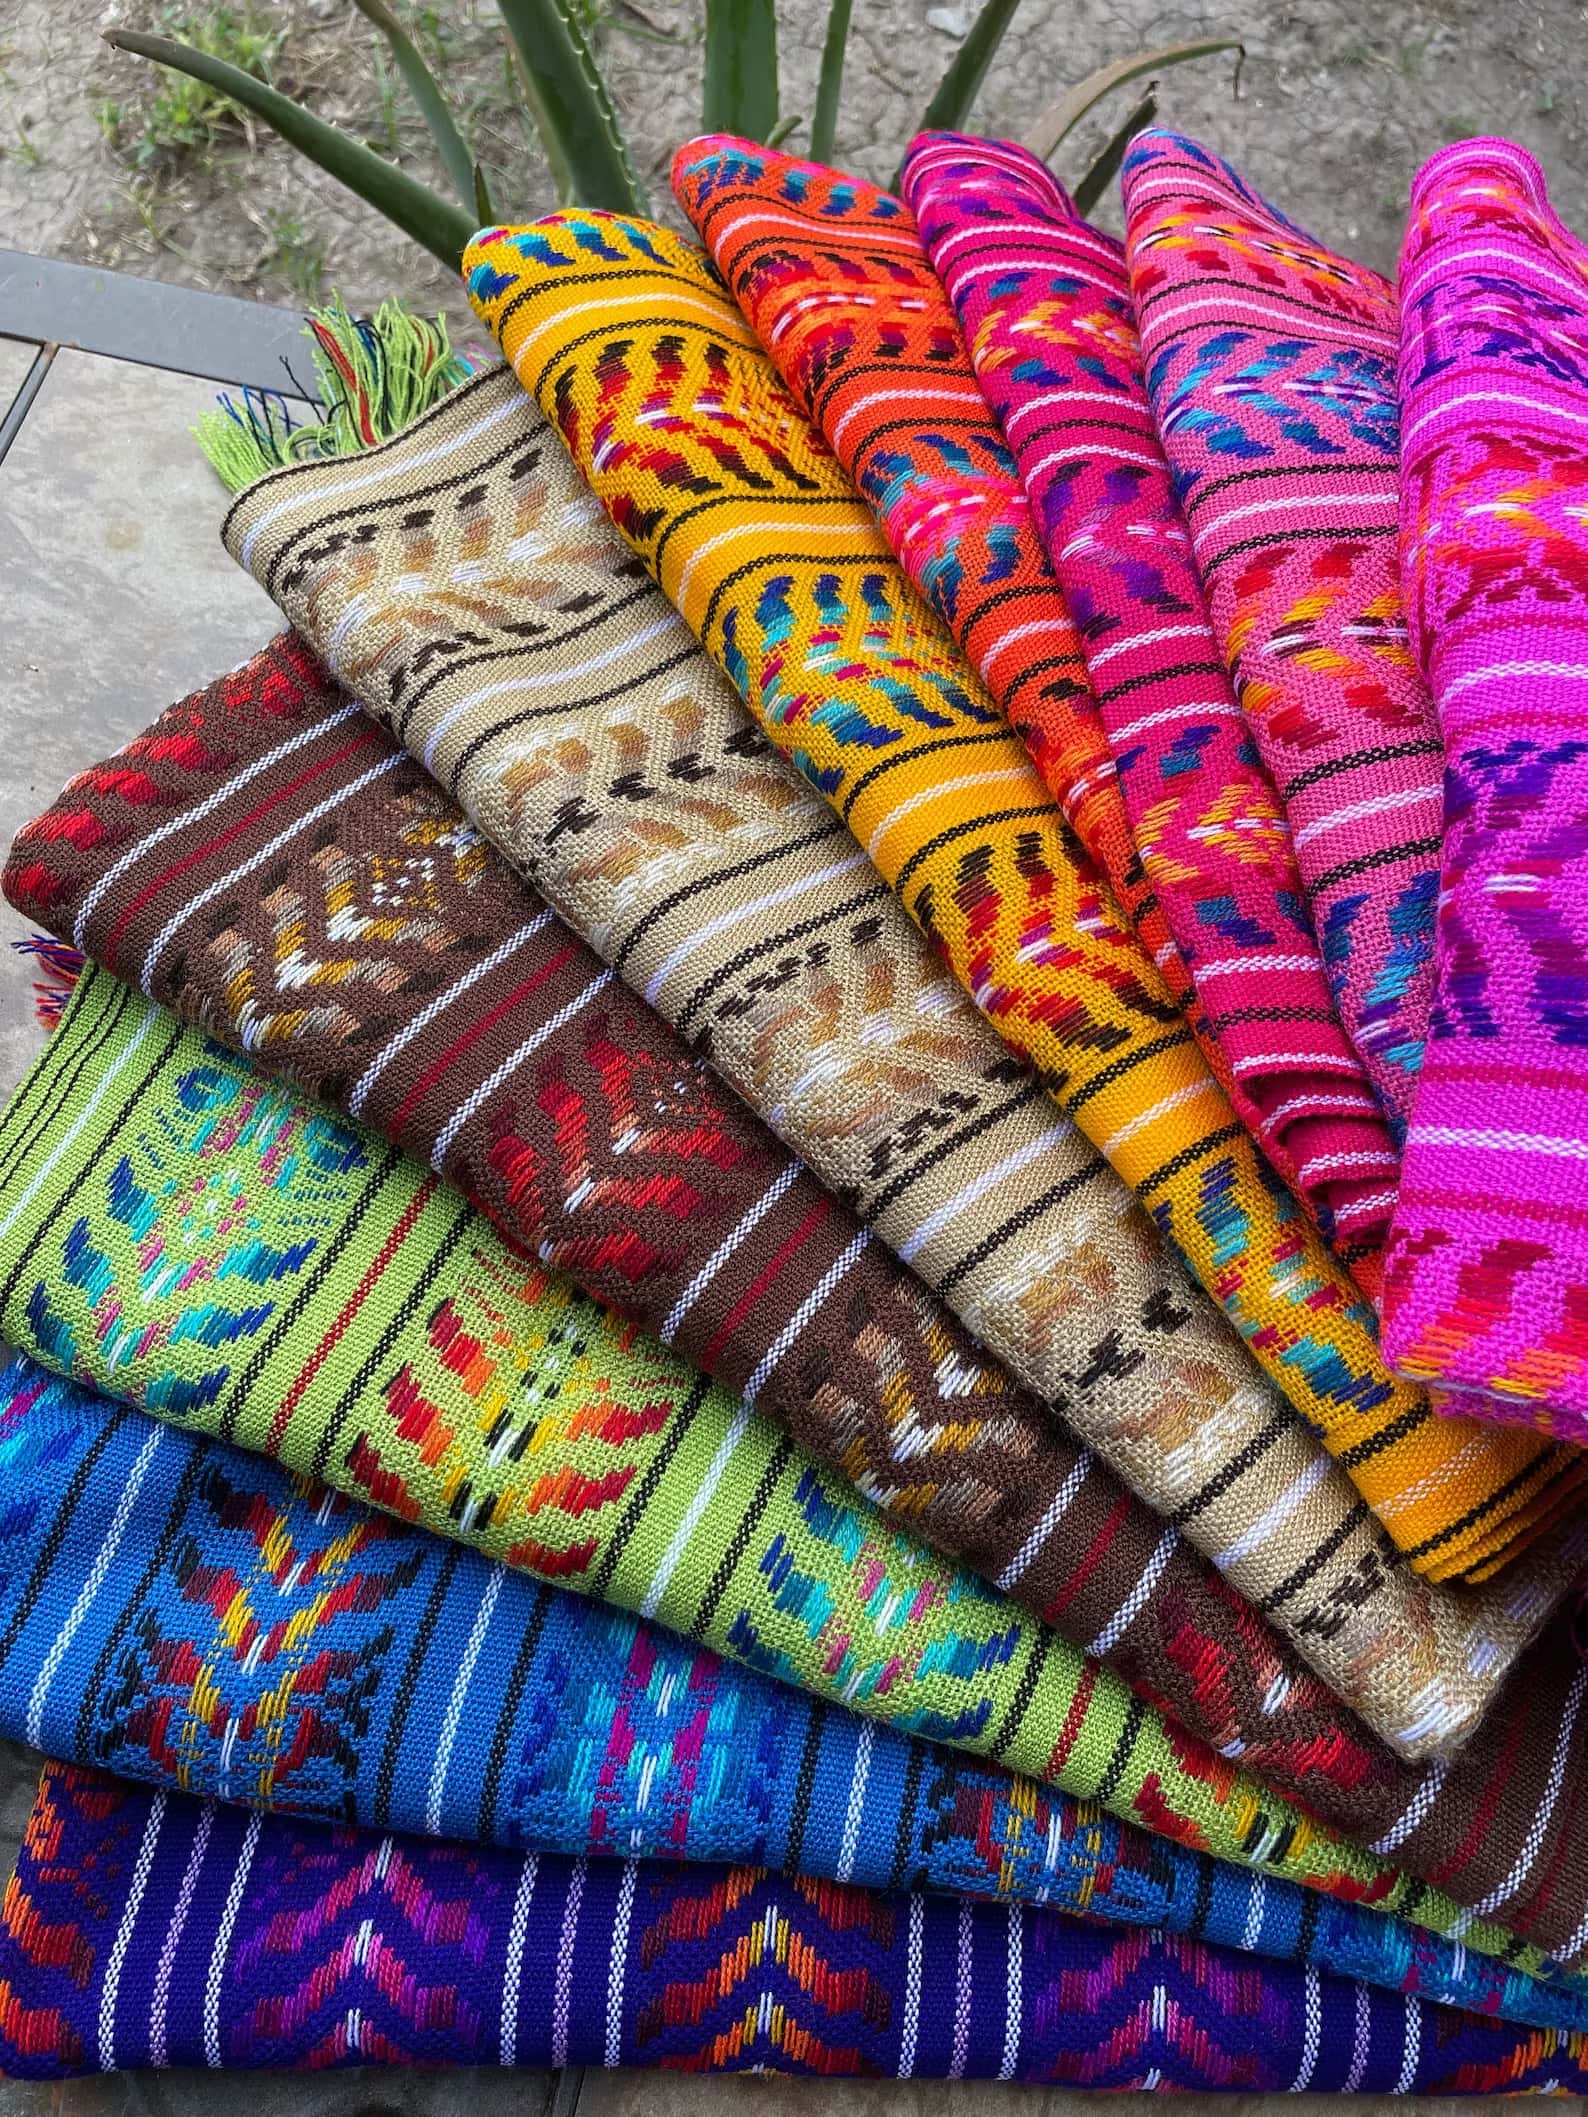 Different colored rebozos folded and spread across on the floor.